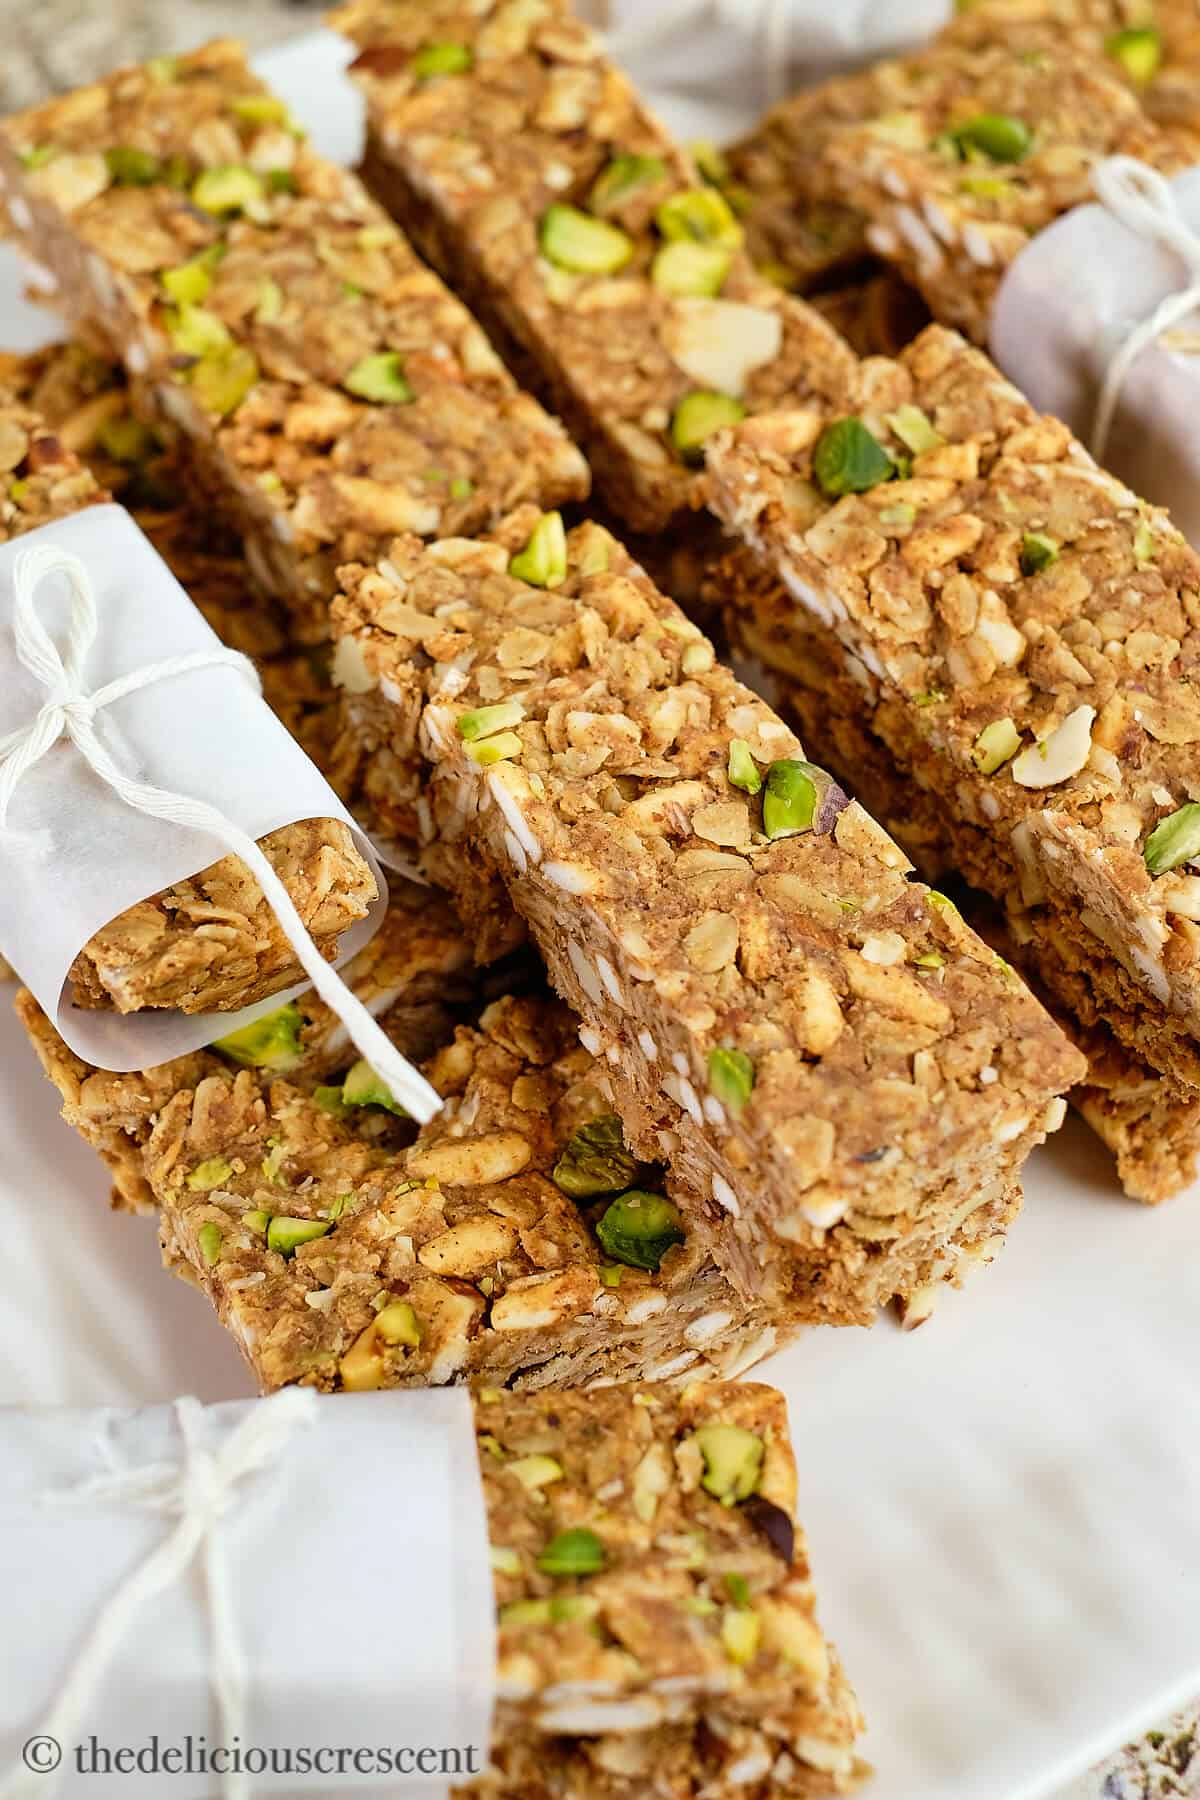 Breakfast bars made with almonds and wrapped.